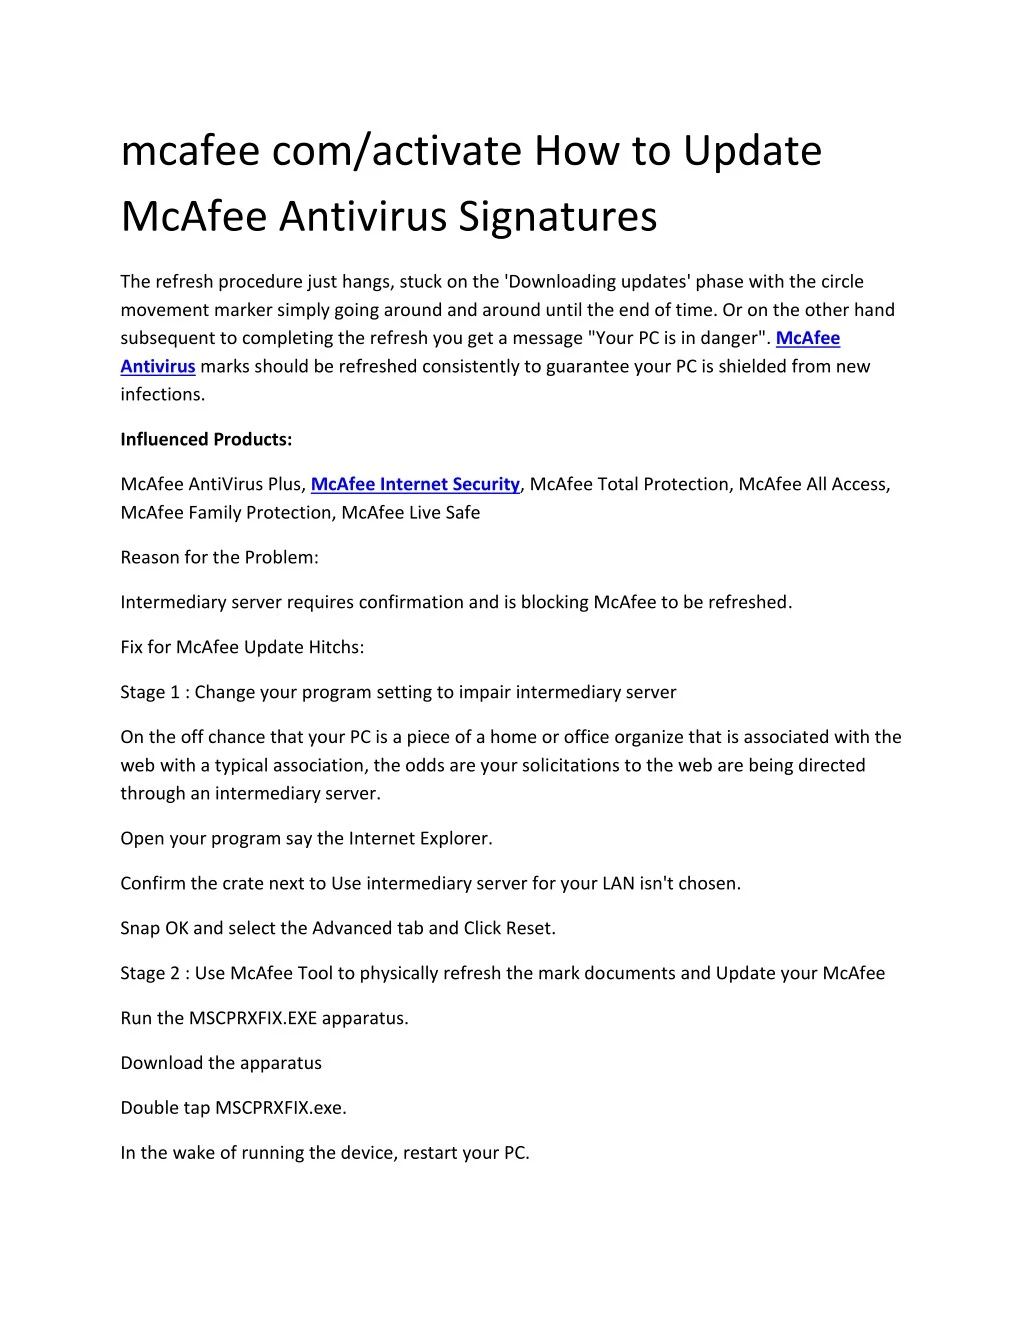 mcafee com activate how to update mcafee